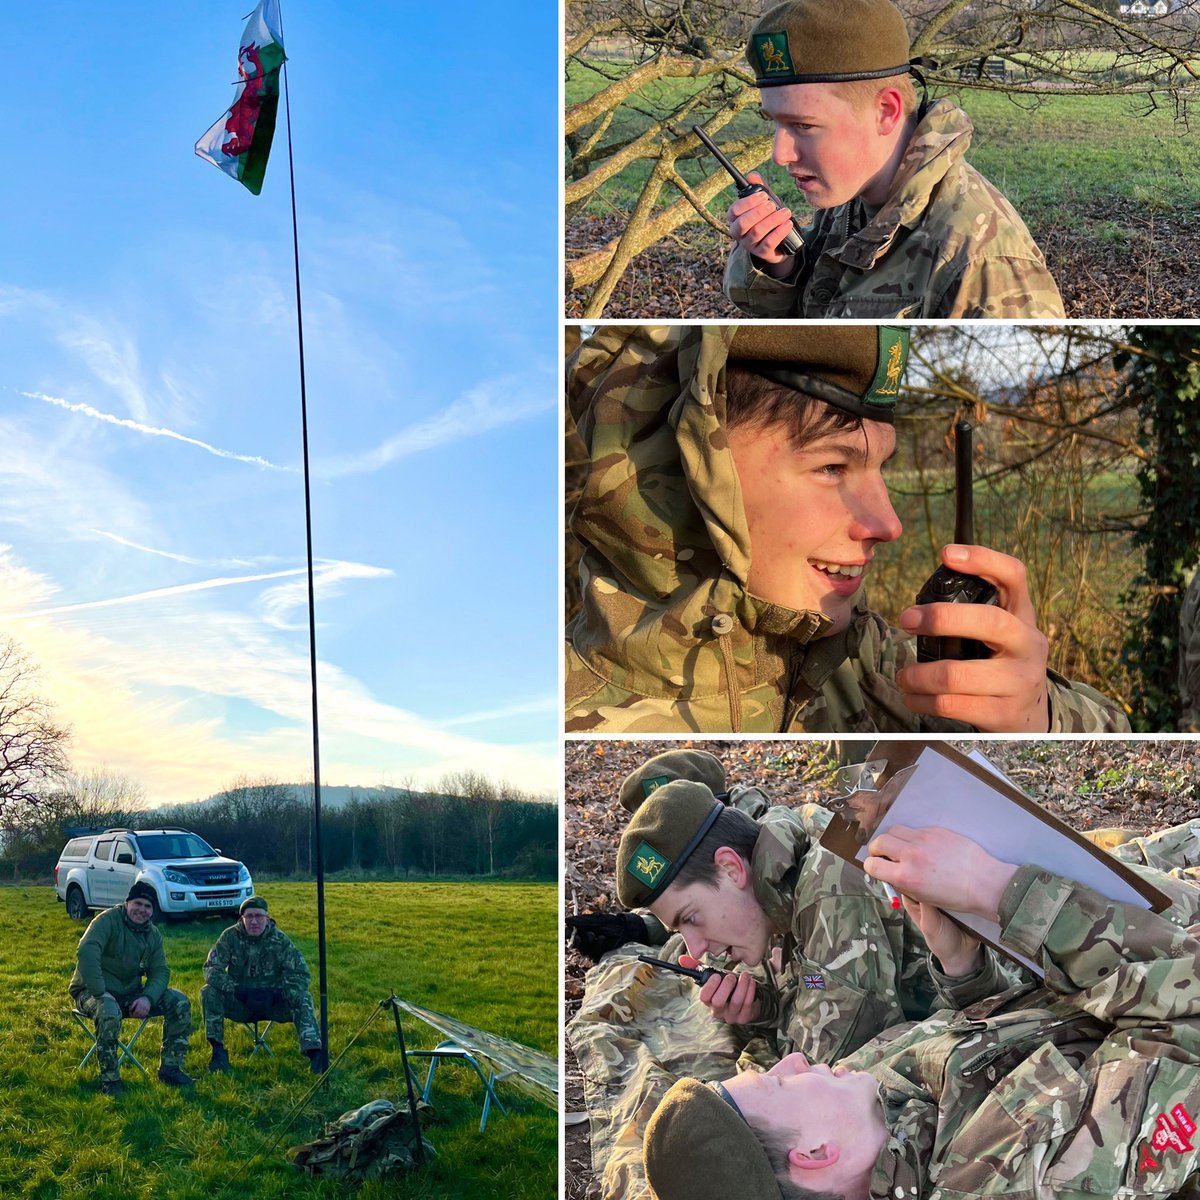 Thrilling day for our Yr 11 #CCF #cadets mastering radio comms 📡 in a field exercise! Kudos for their teamwork, keen observation & brilliantly handling the surprise camp invasion. Thanks to all for braving the chill 🥶 and making it a huge success! #Teamwork @HabsMonmouth